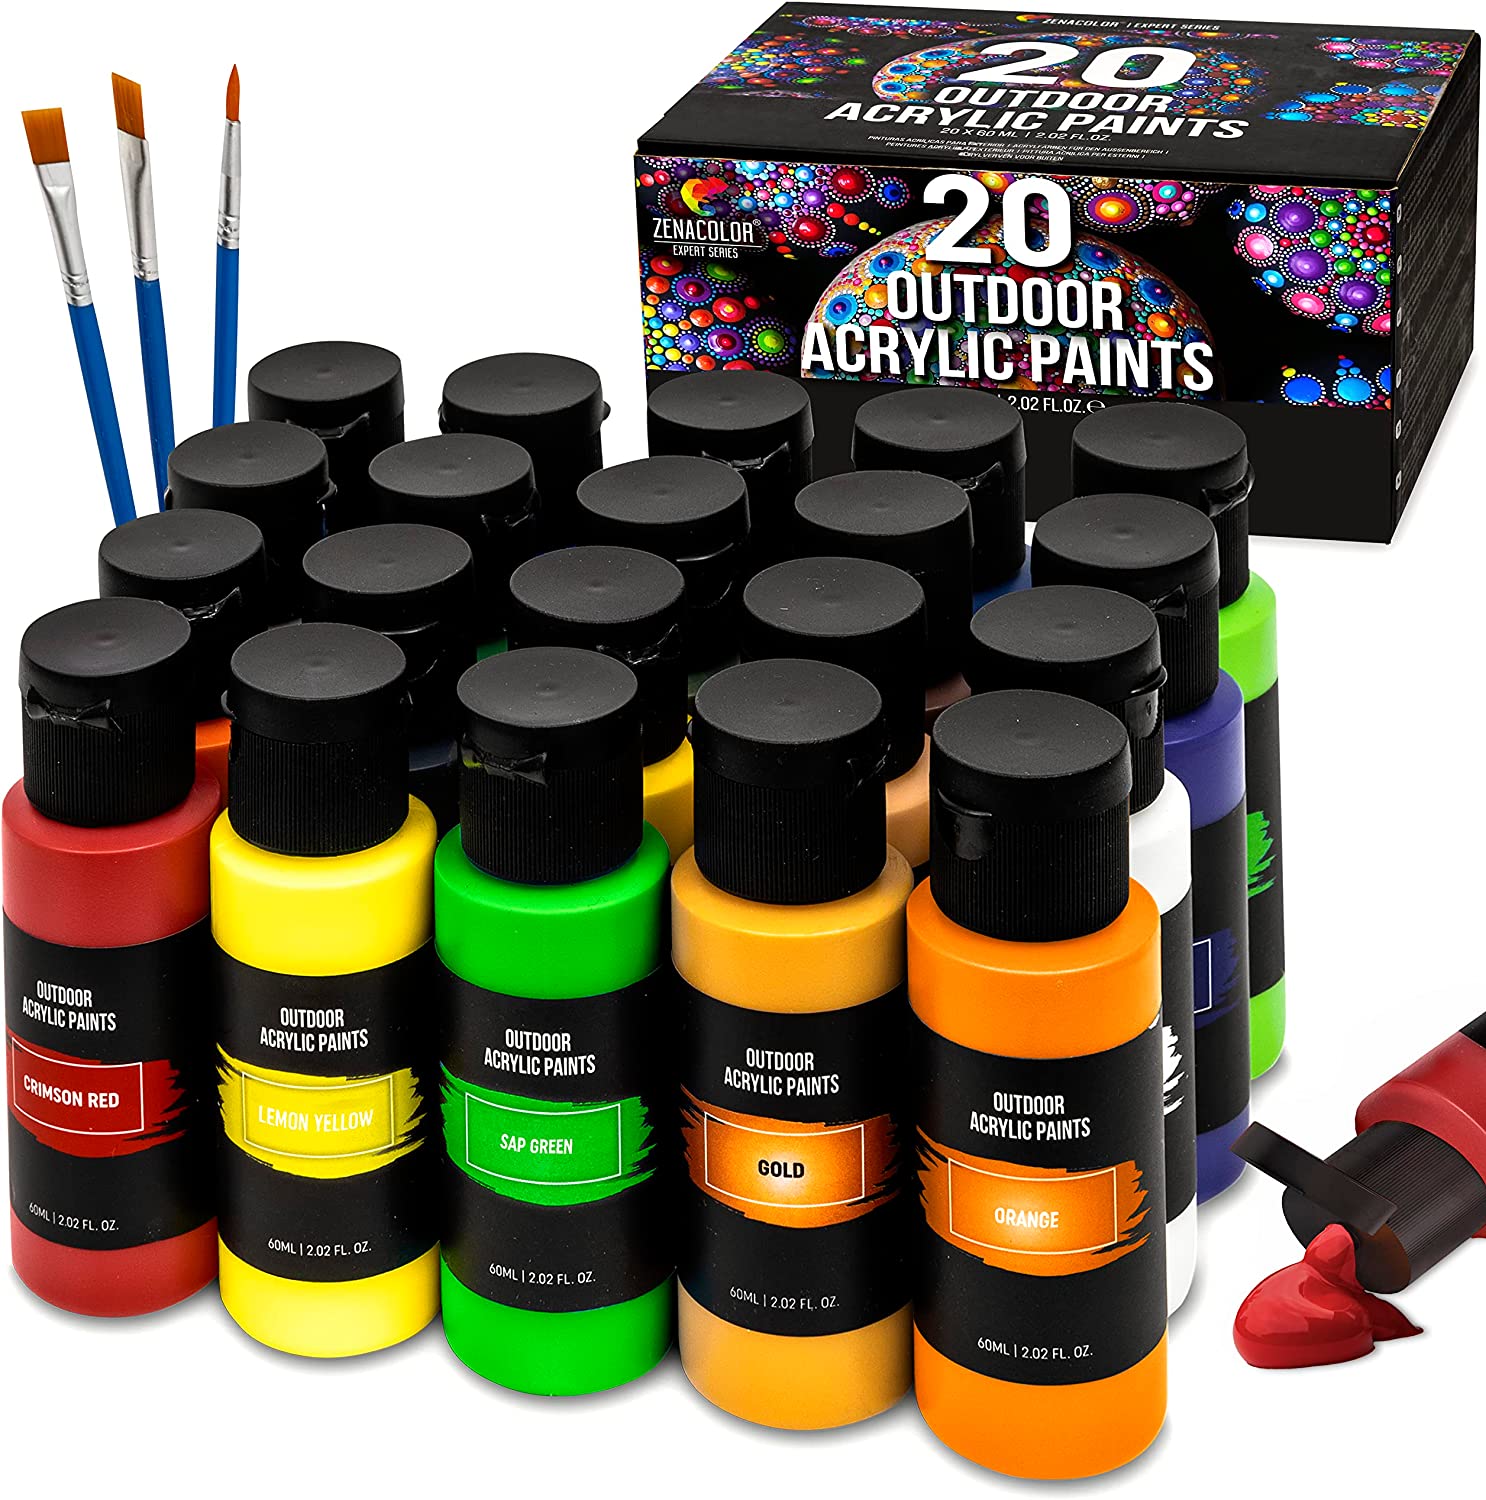 Live - Is the Caliart Acrylic Paint Set the best?